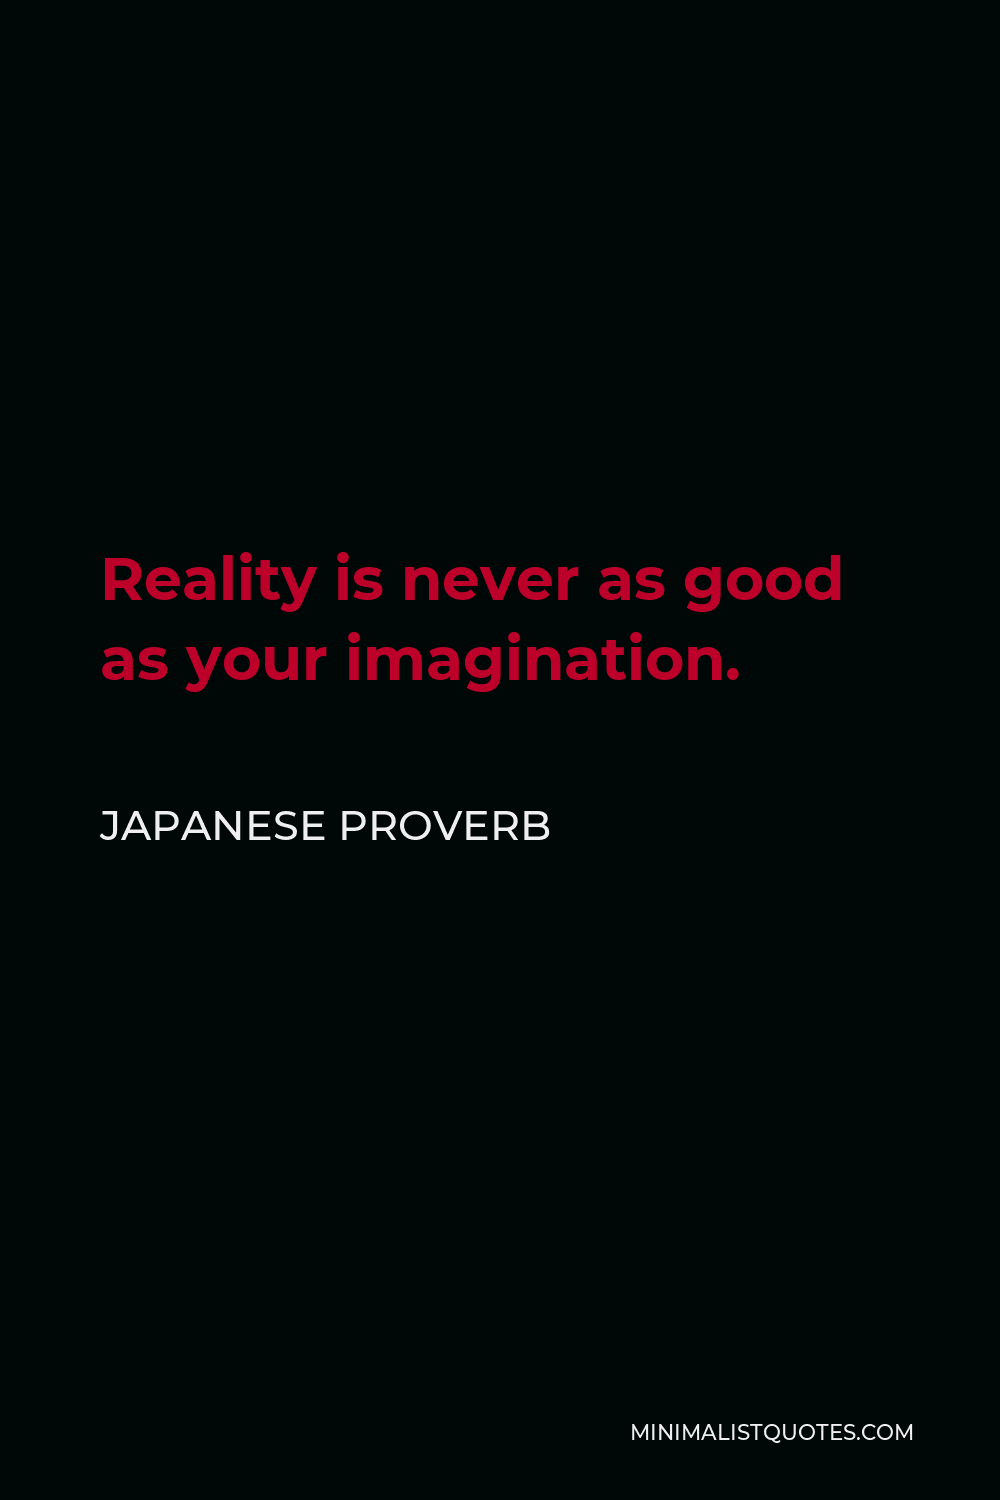 Japanese Proverb Quote - Reality is never as good as your imagination.